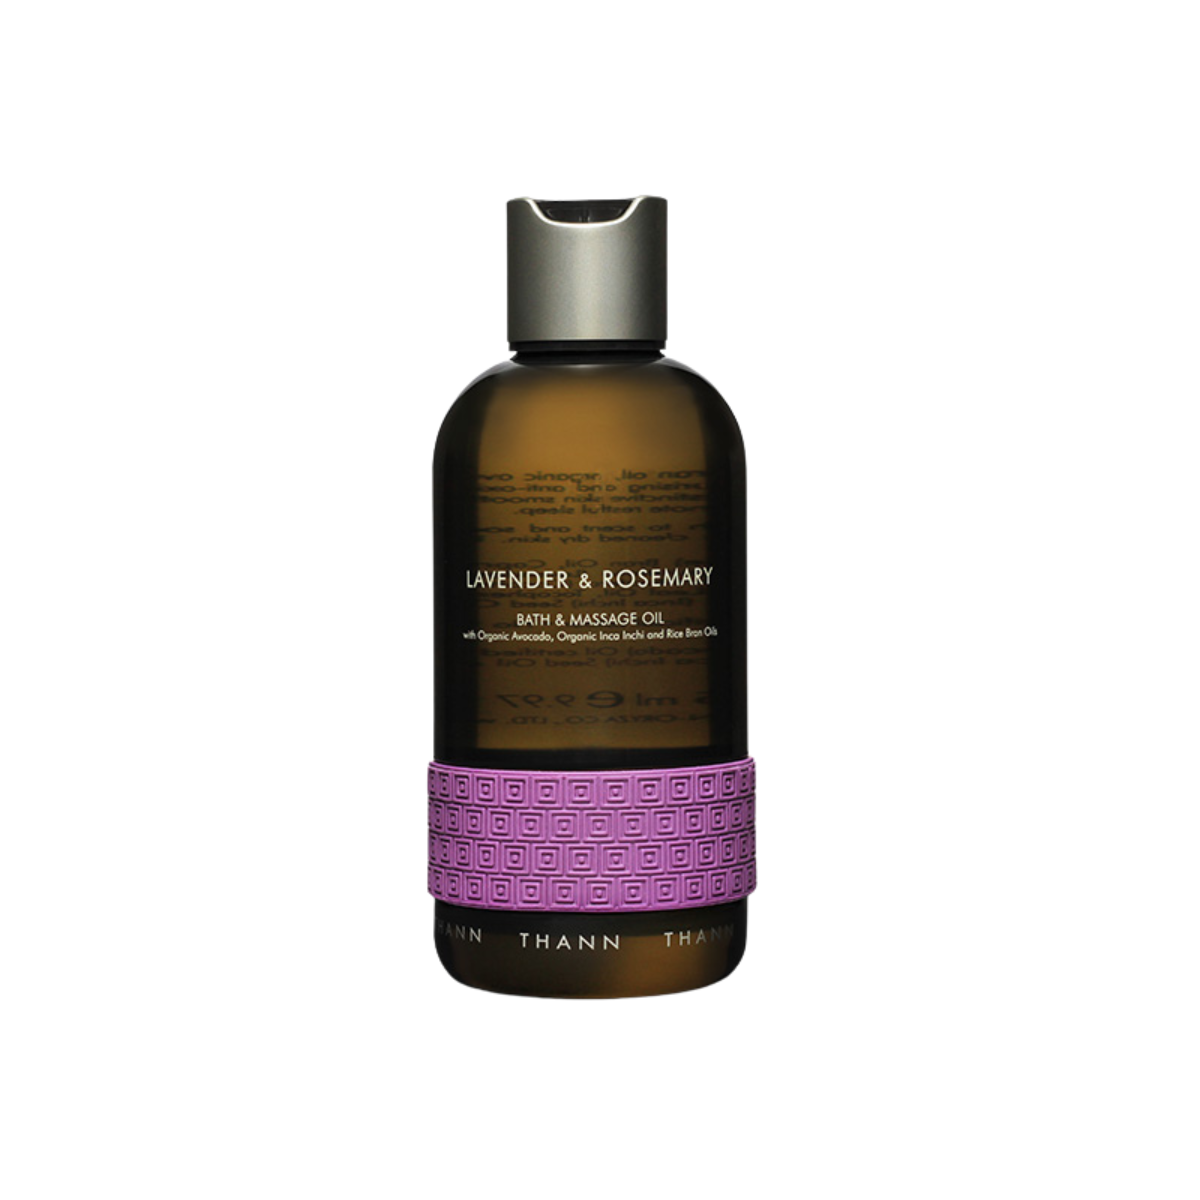 Lavender & Rosemary Bath and Massage Oil